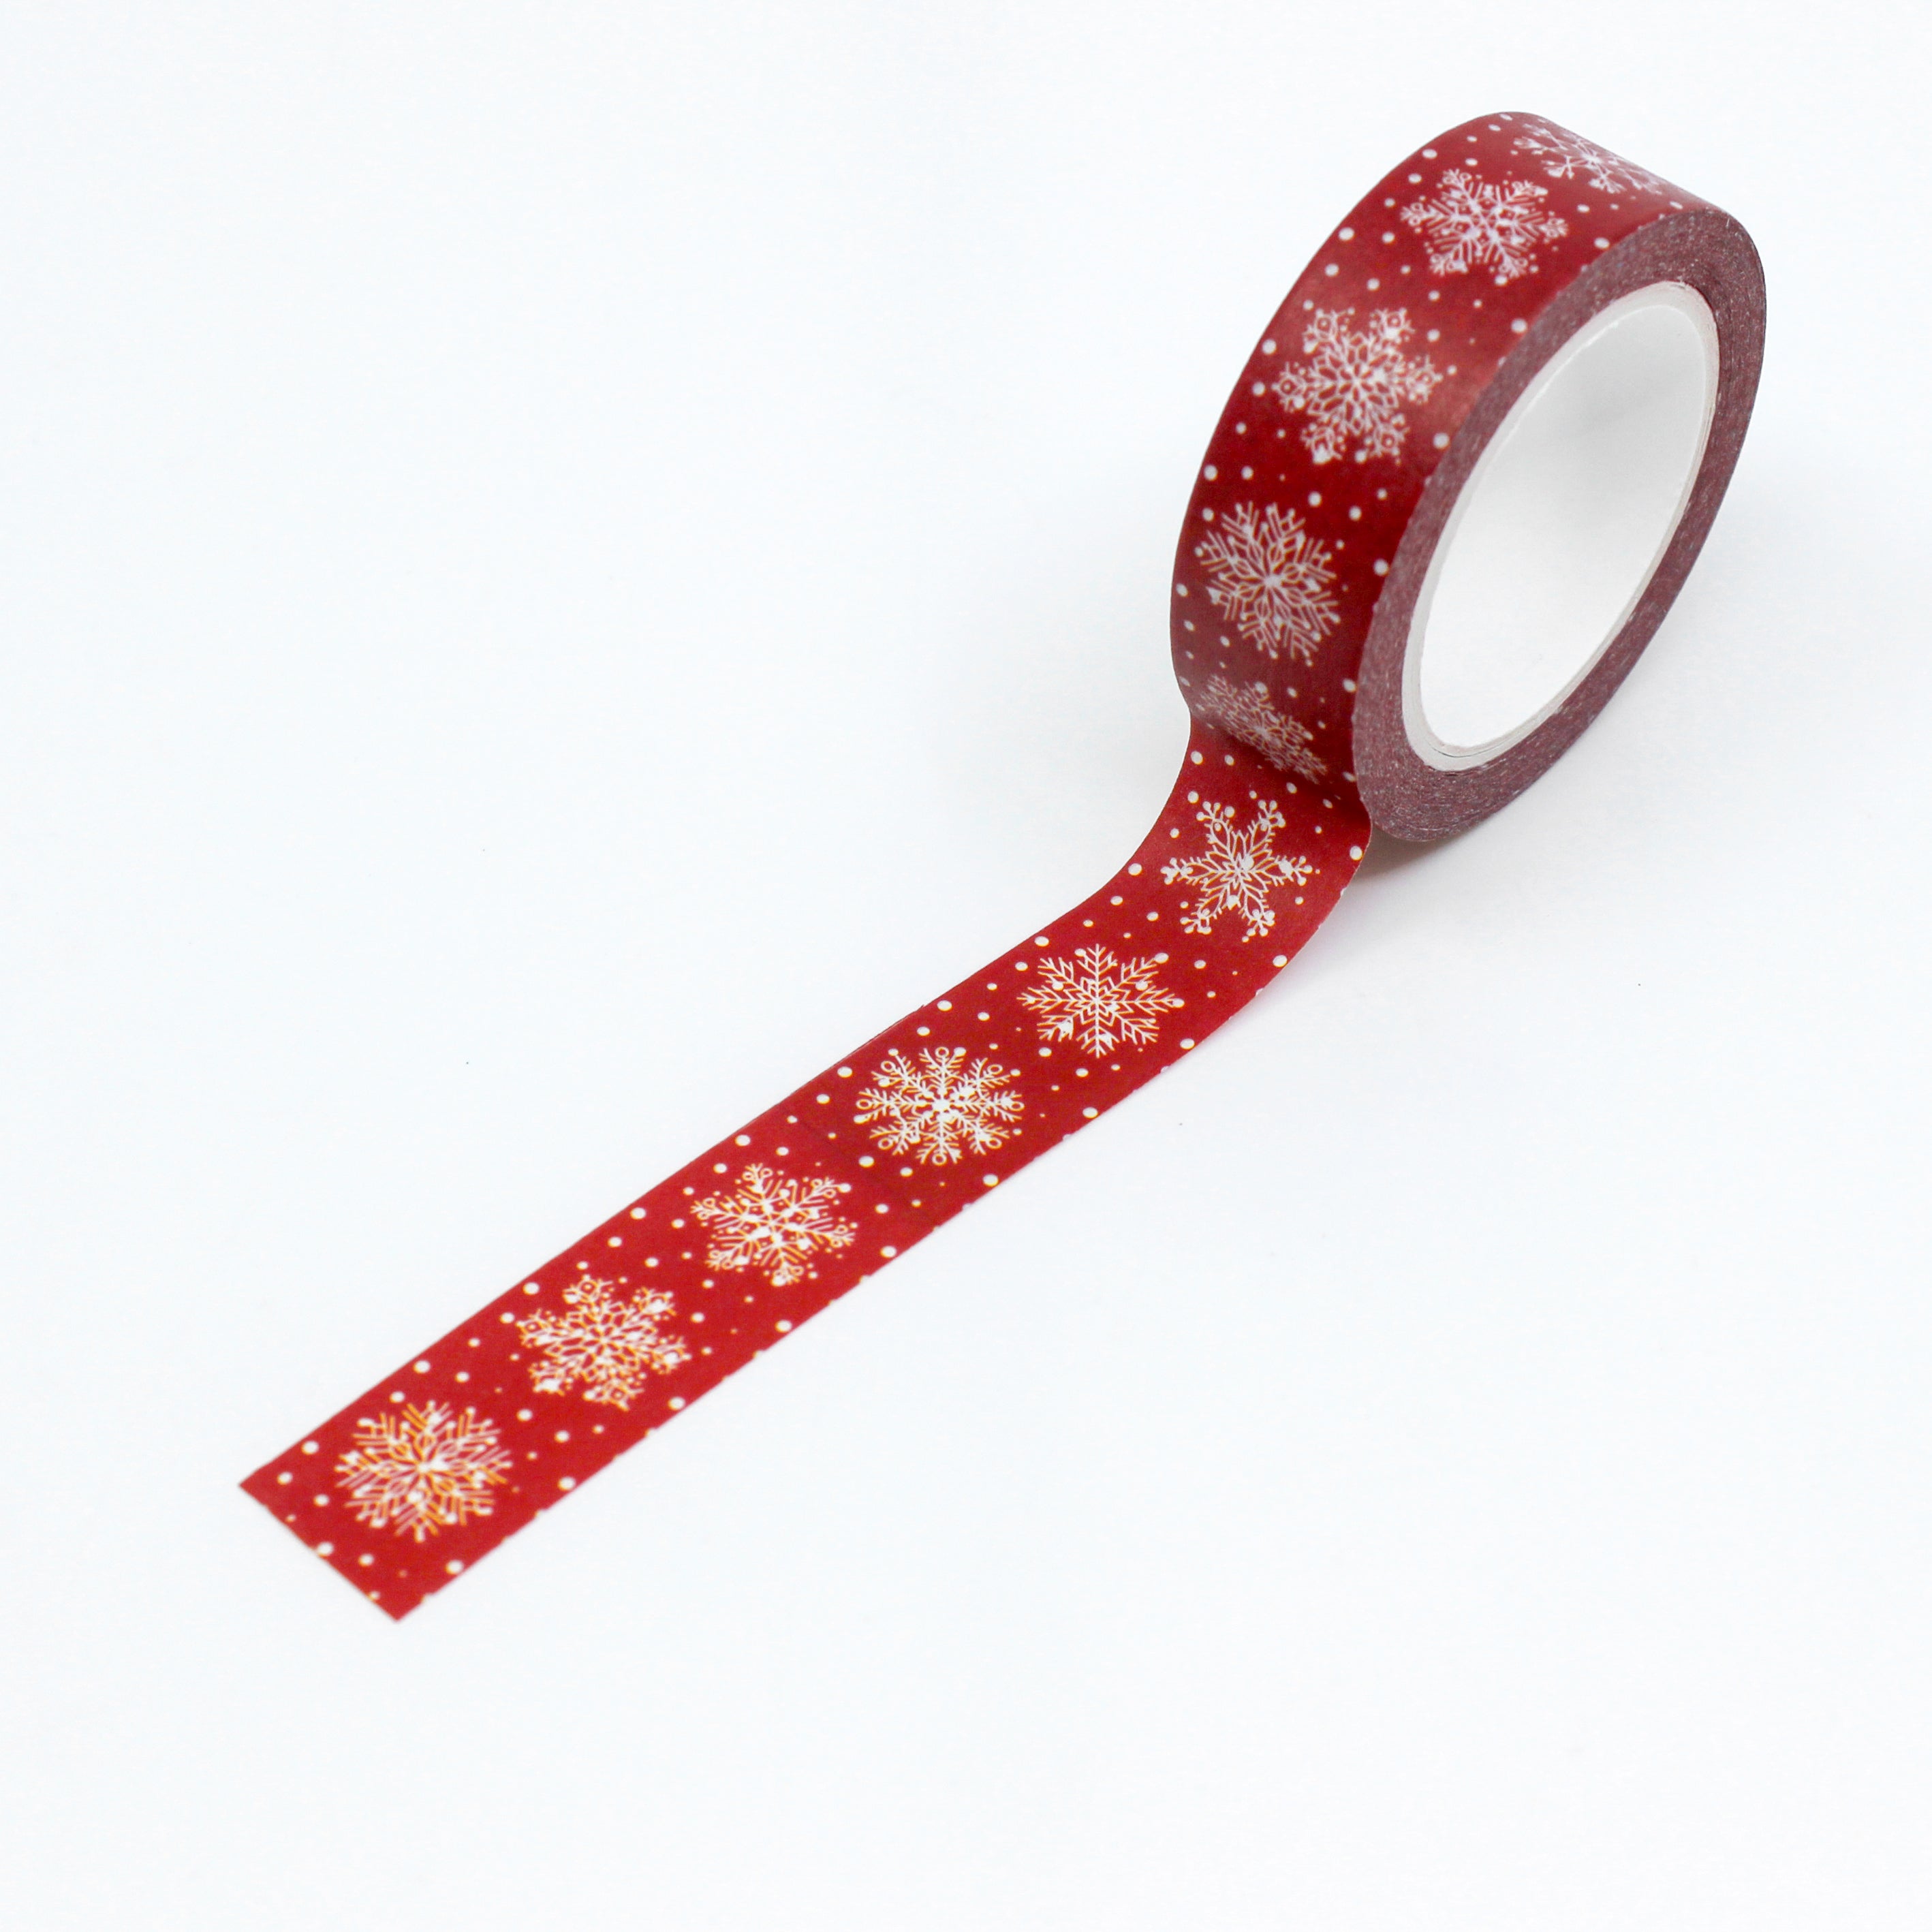 This is a full pattern repeat view of dark red snowflakes washi tape from BBB Supplies Craft Shop